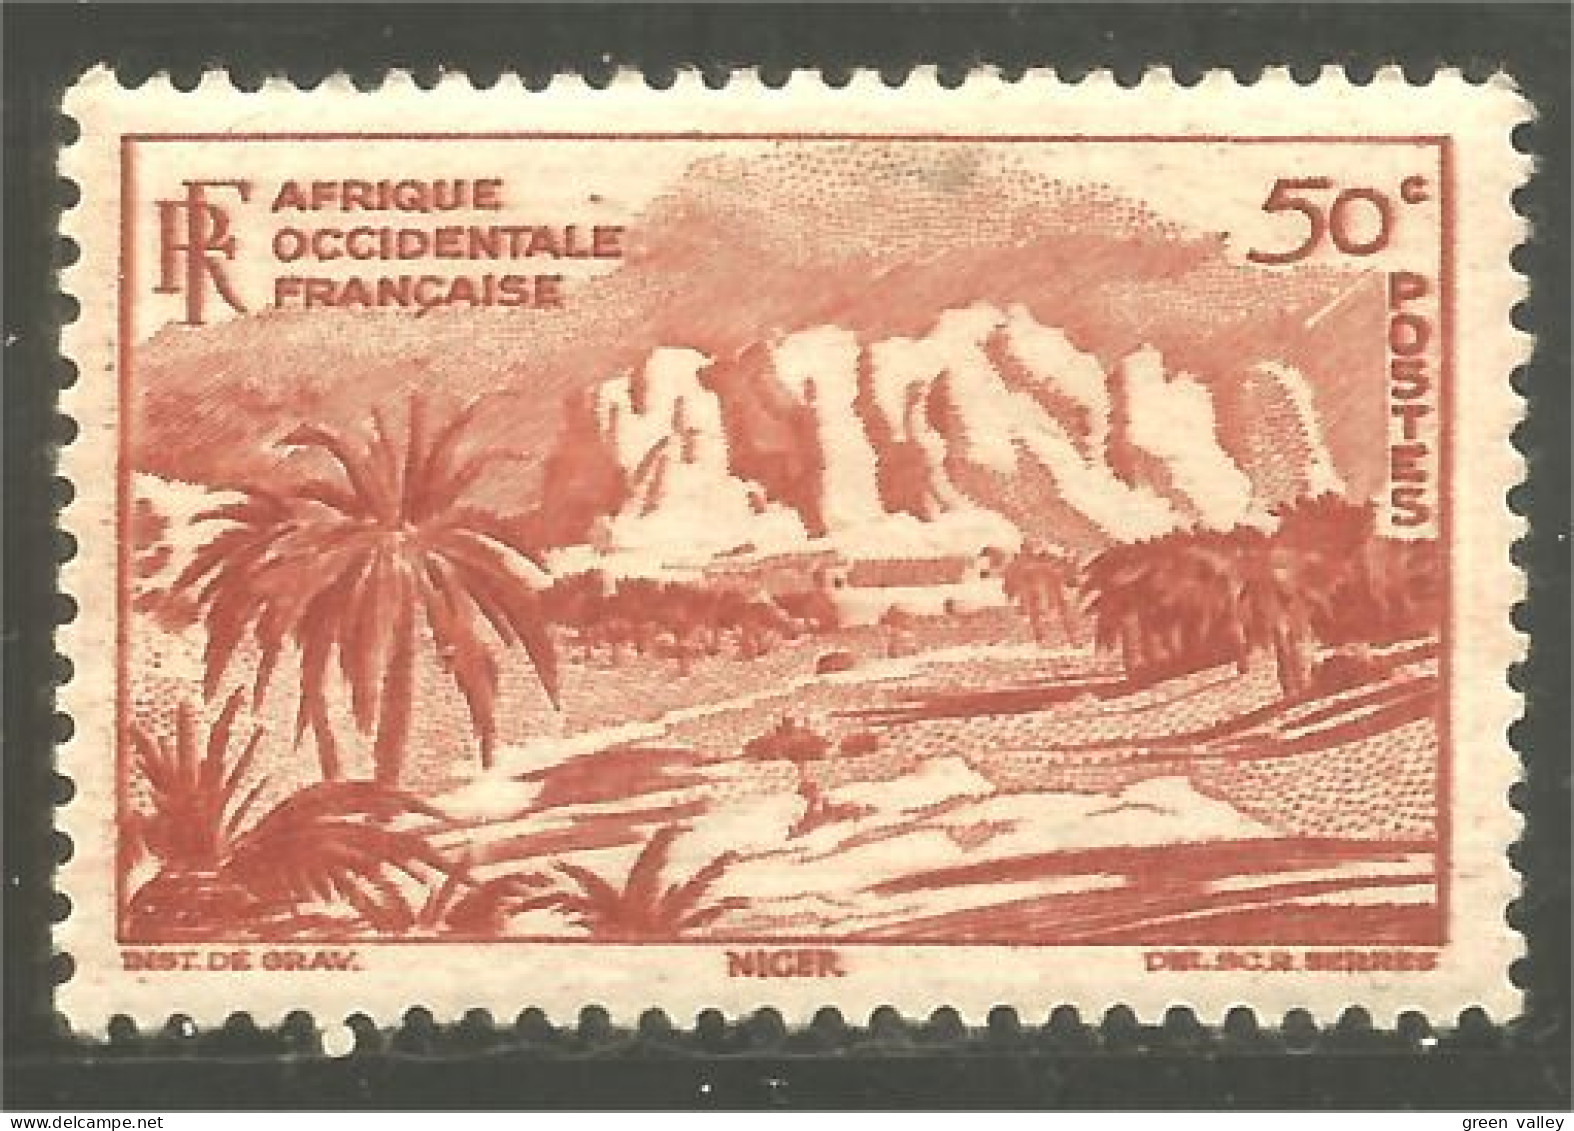 372 AOF Montagnes Niger Mountains MH * Neuf (f3-AEF-387) - Unused Stamps